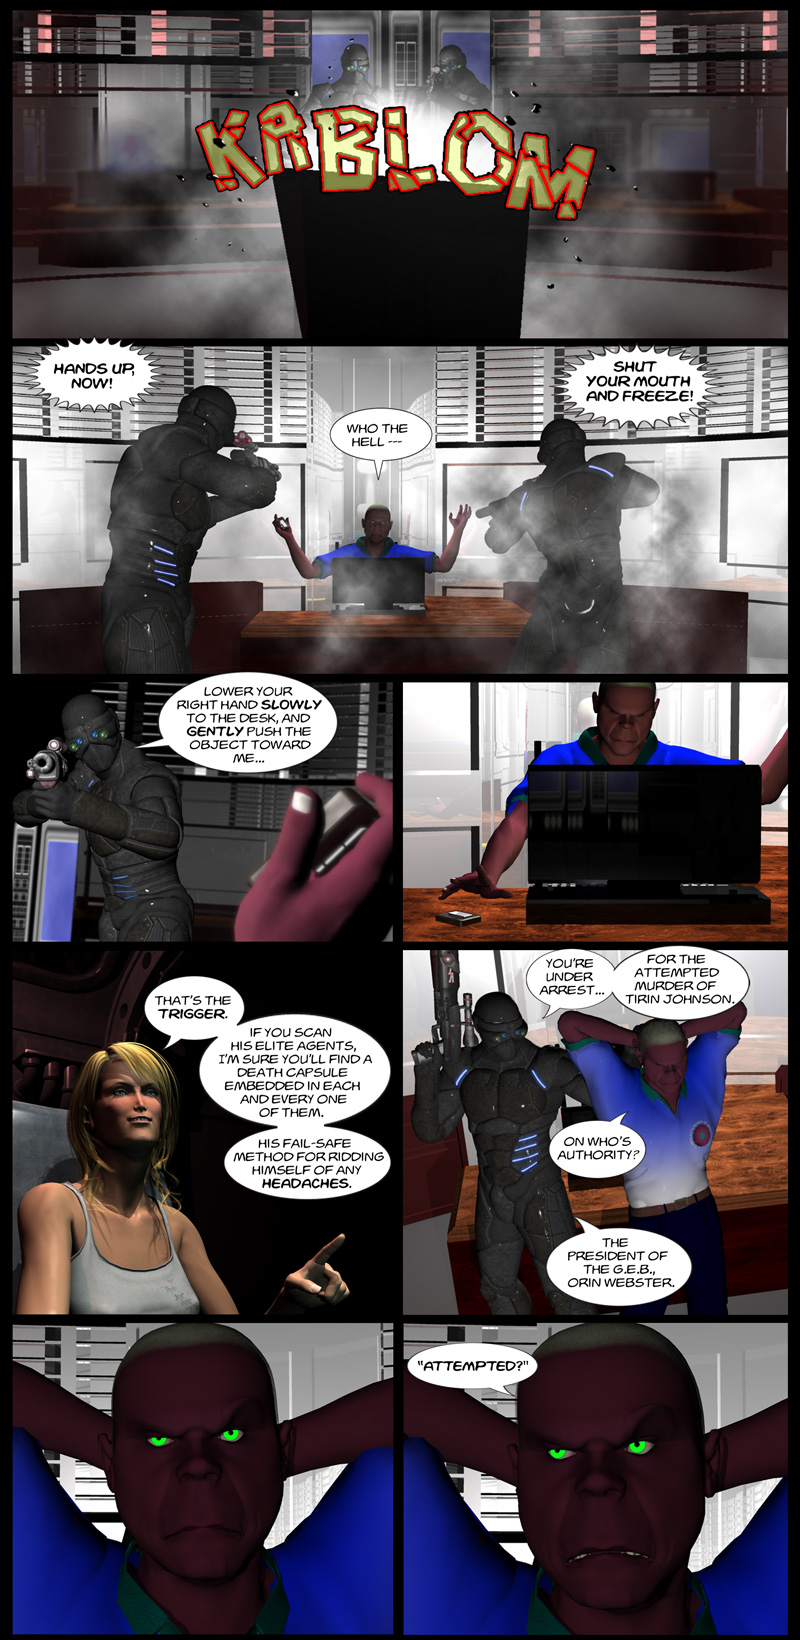 Chapter 4, page 29 – Flin is arrested